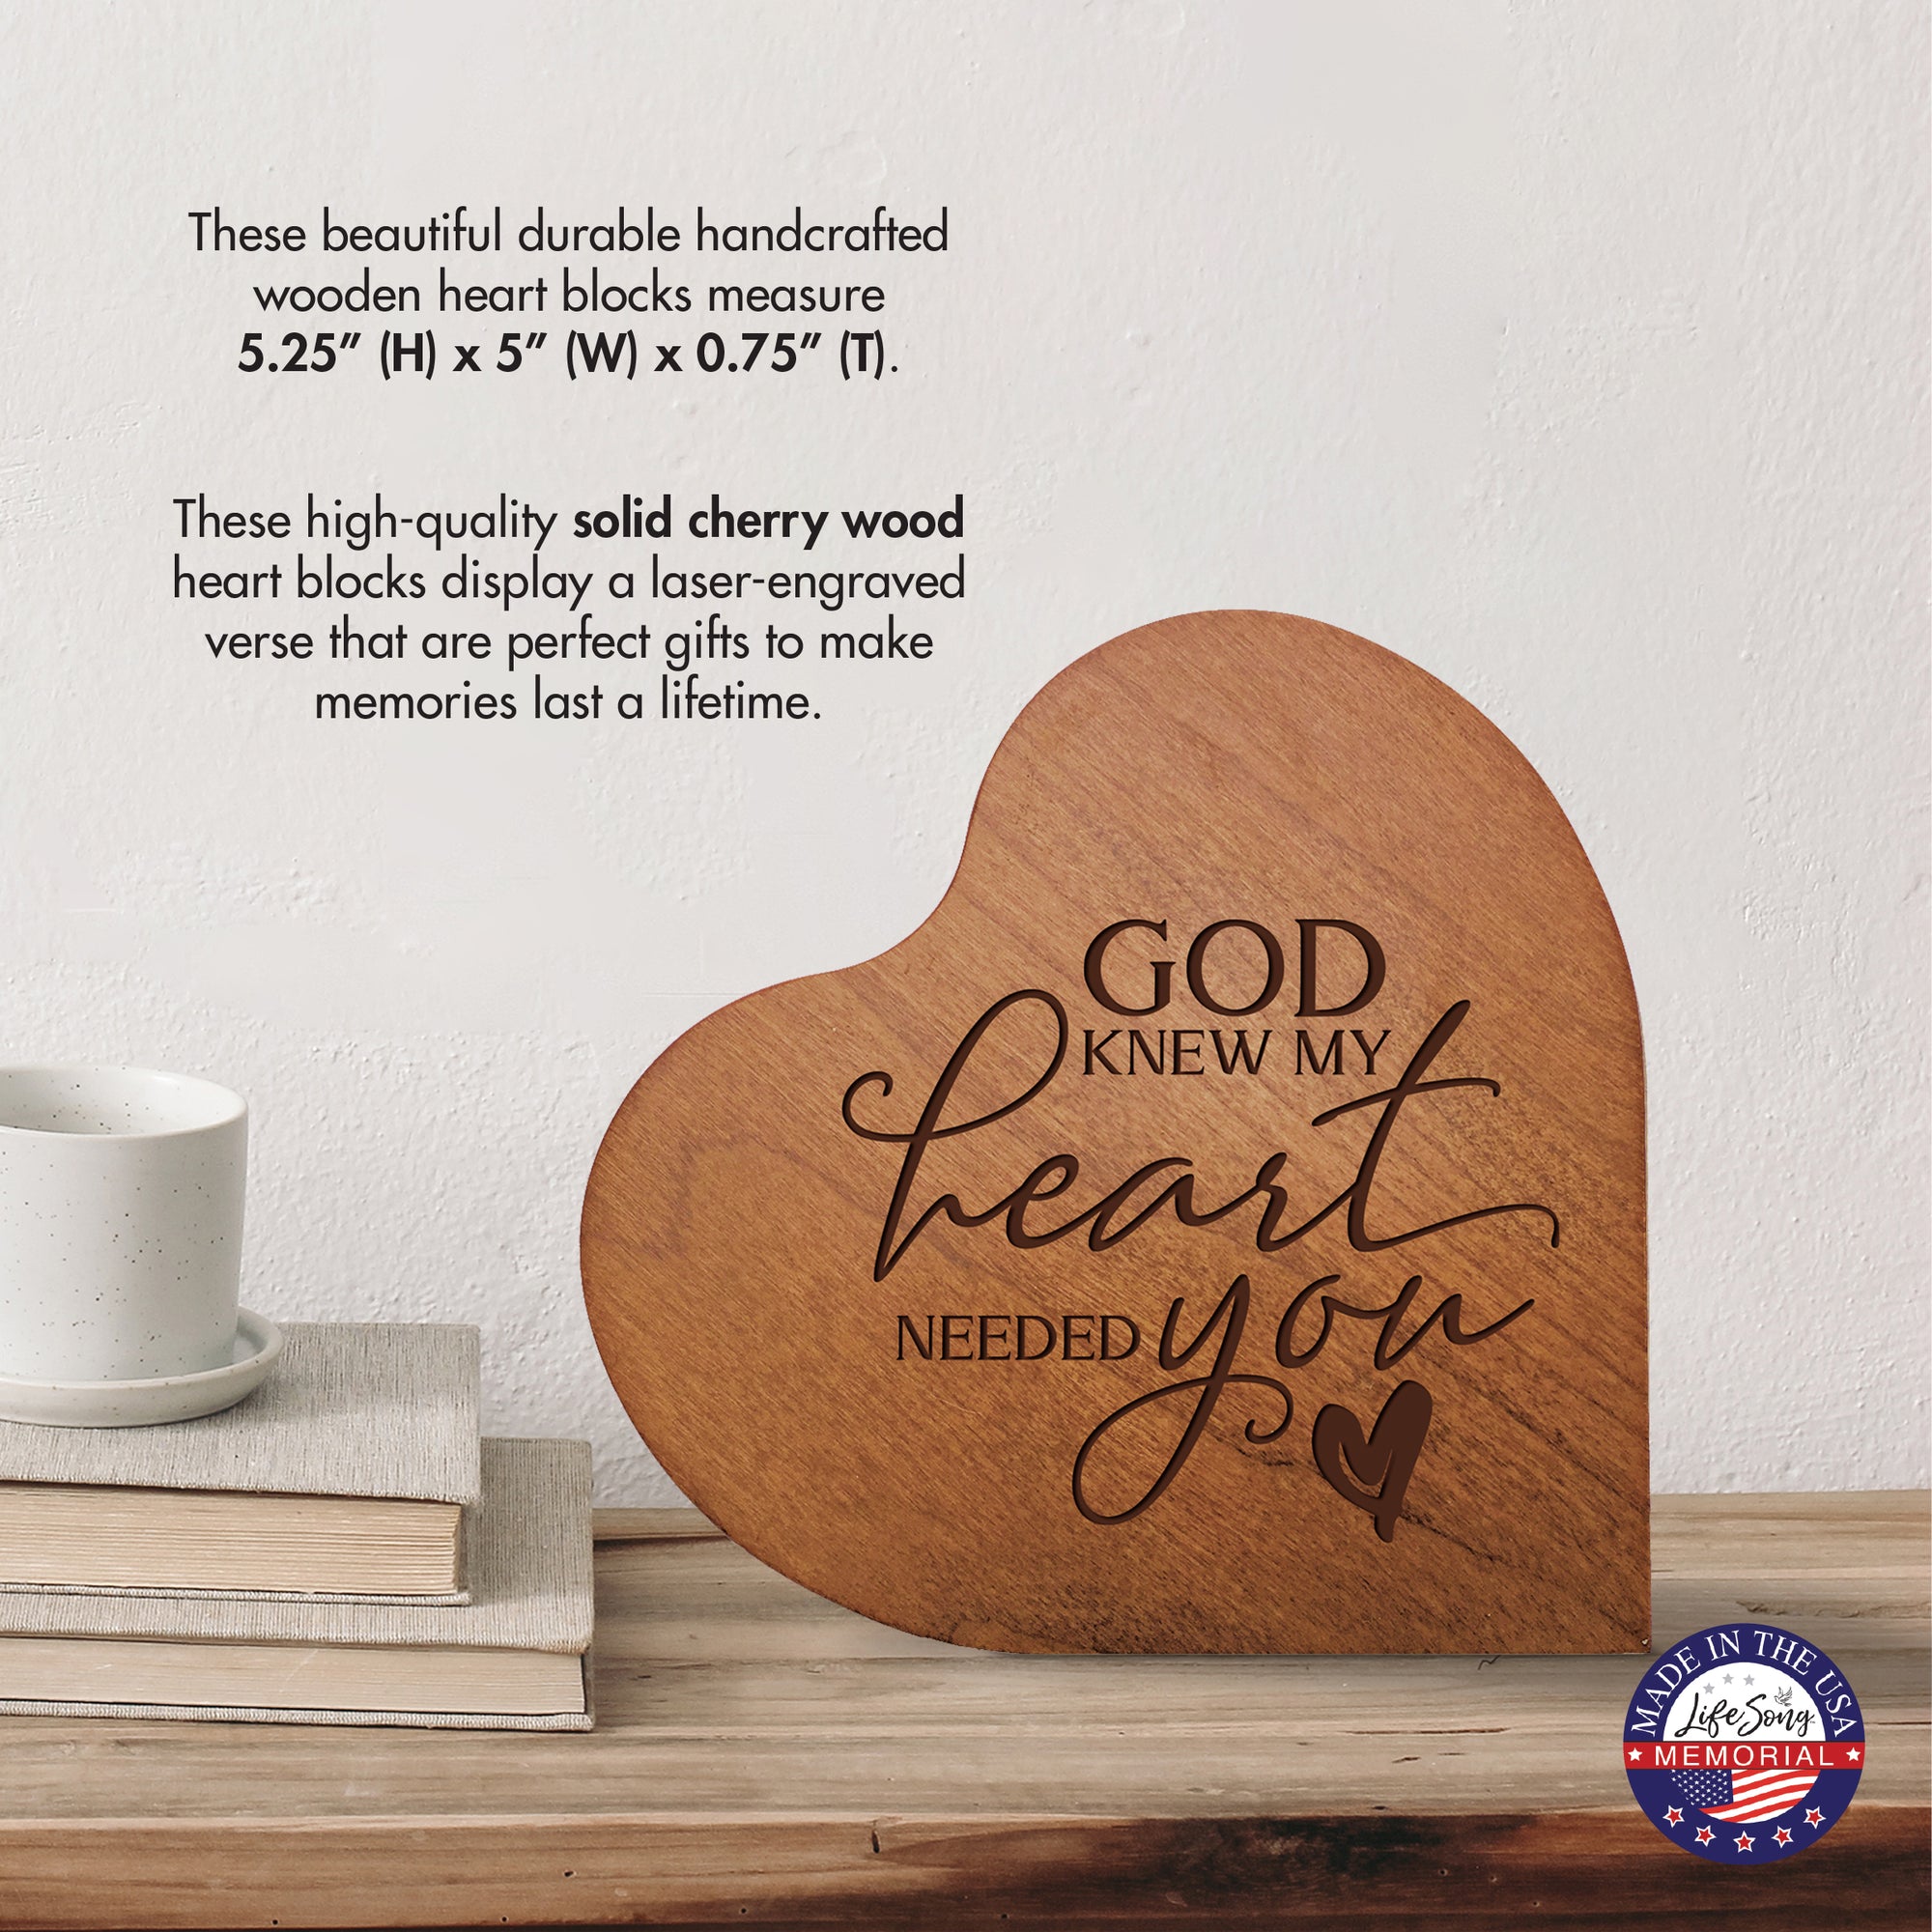 Memorial gift for the loss of a loved one: intricately engraved solid wood heart-shaped tabletop sign.